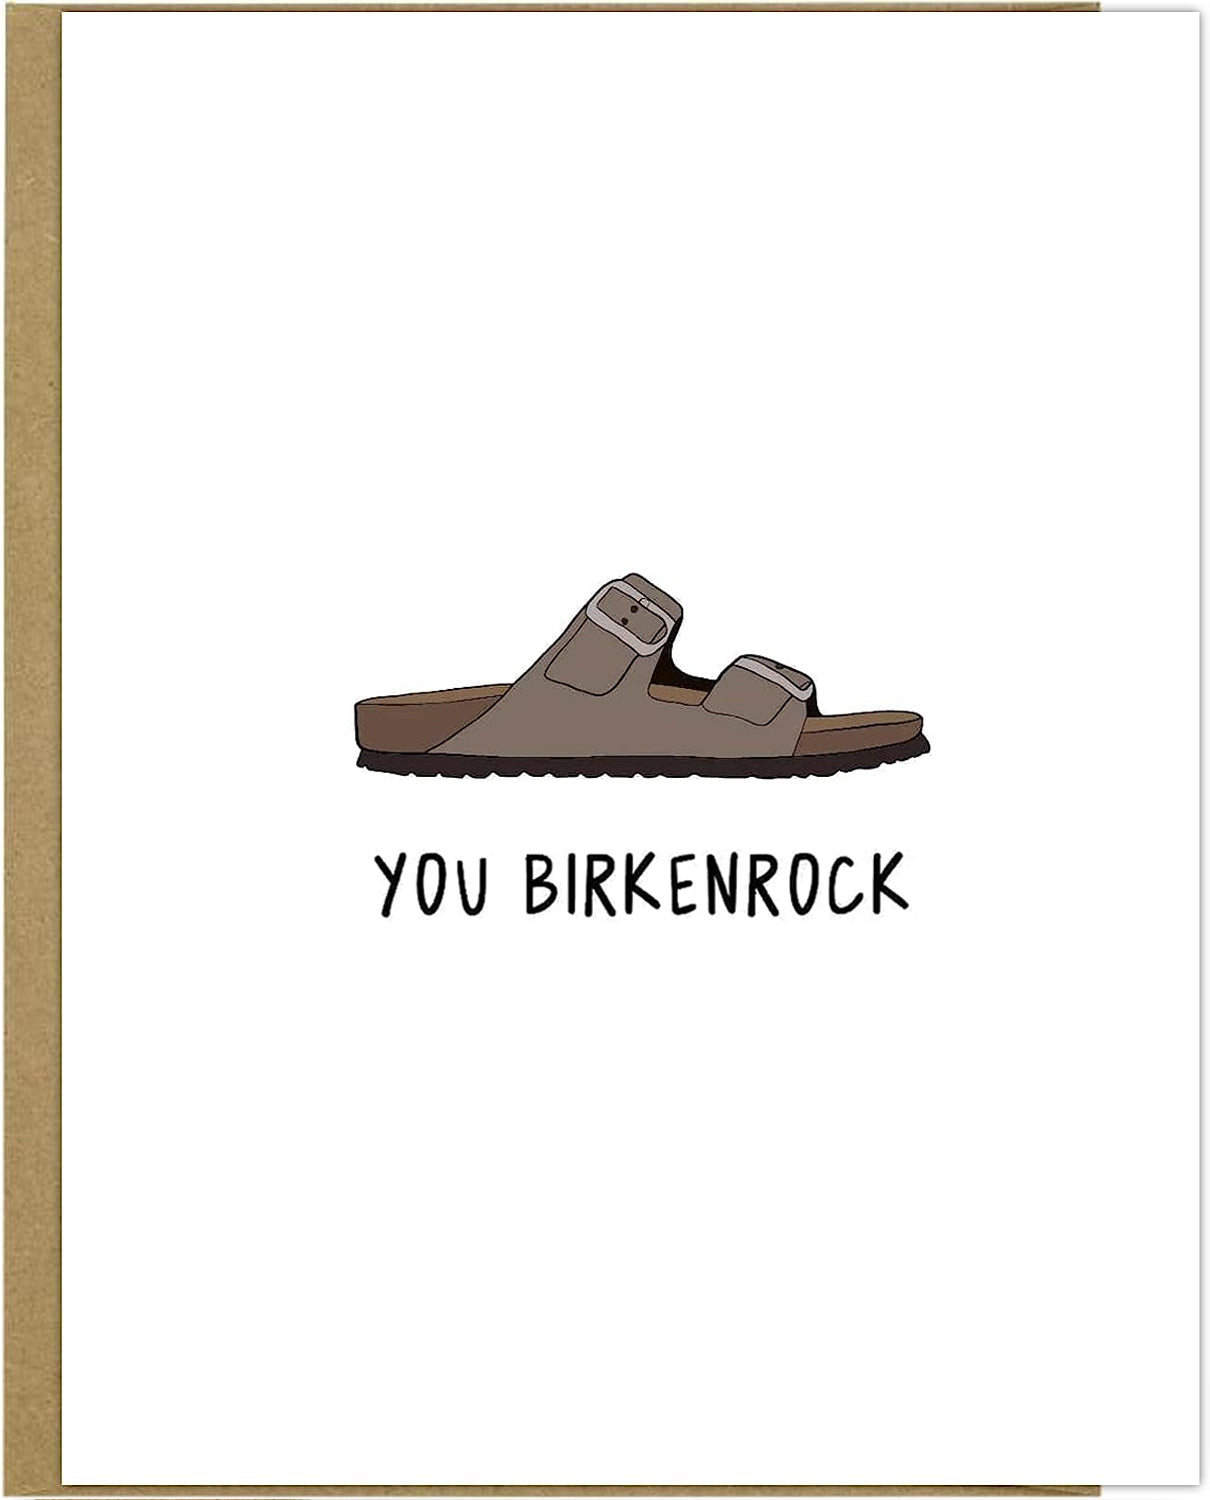 Your rockdoodles birkenrock greeting card comes in a plastic sleeve with a natural envelope, featuring an embossed design.